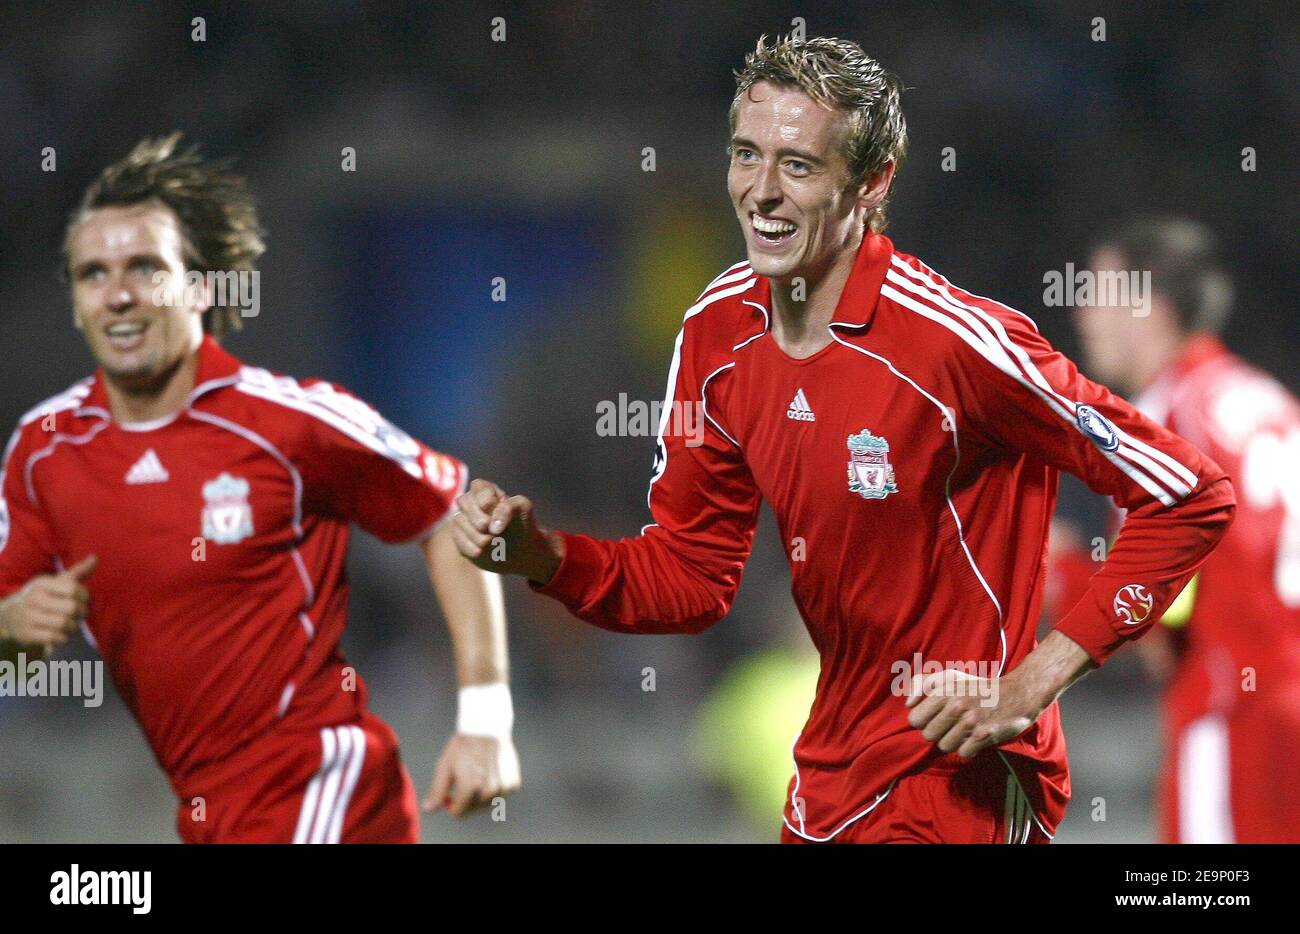 Liverpool's Peter Crouch celebrates his goal during the UEFA Champions League, Group C, Girondins de Bordeaux vs Liverpool FC at the Stade Chaban-Delmas in Bordeaux, France on October 18, 2006. Liverpool won 1-0. Photo by Christian Liewig/ABACAPRESS.COM Stock Photo